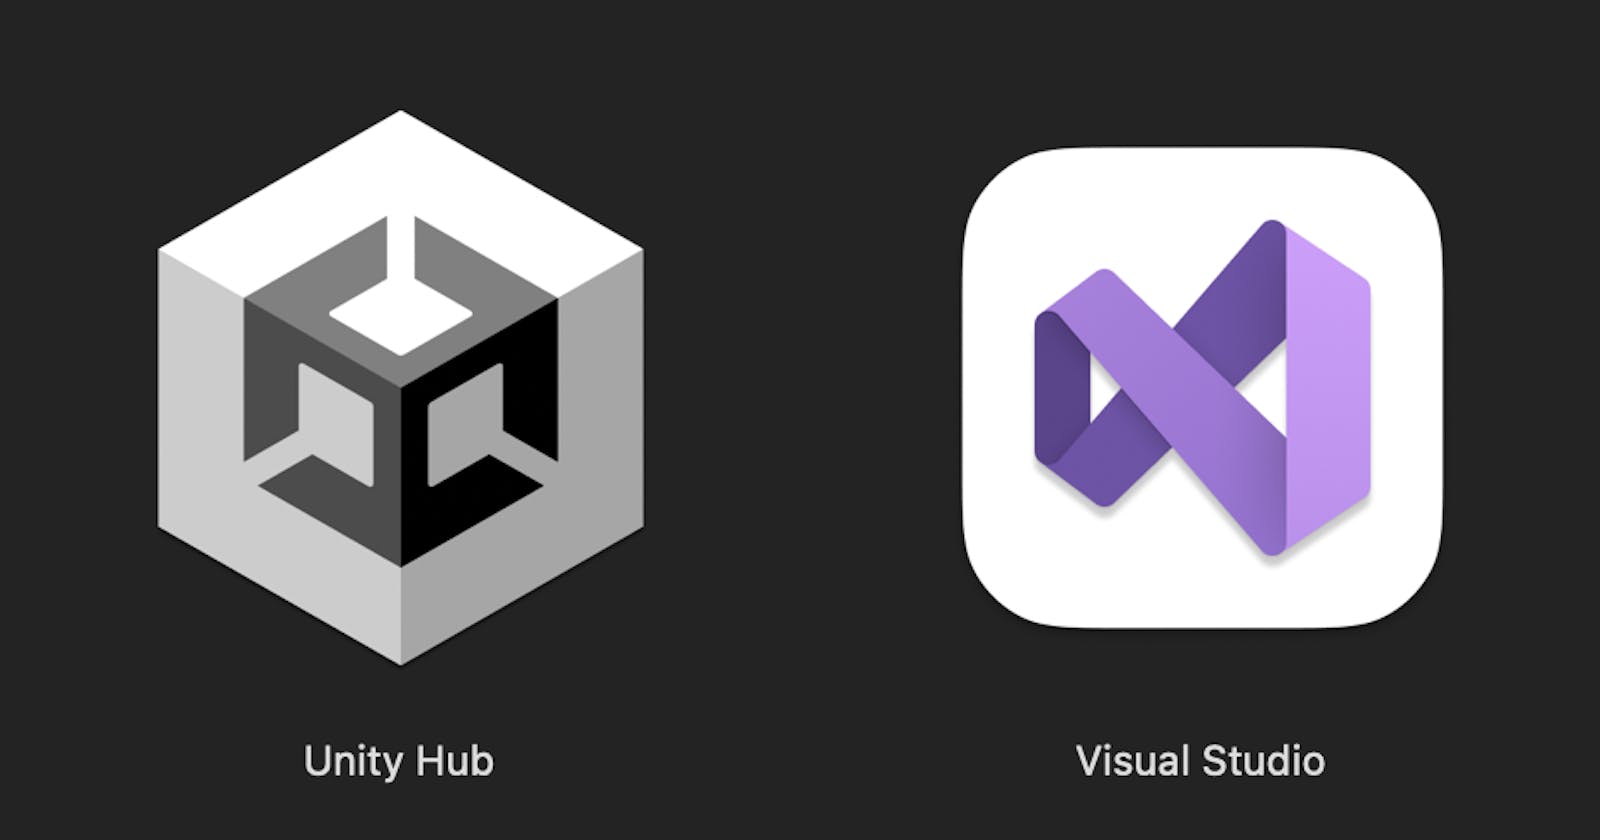 How to Install Unity and Visual Studio on Mac without Admin Rights